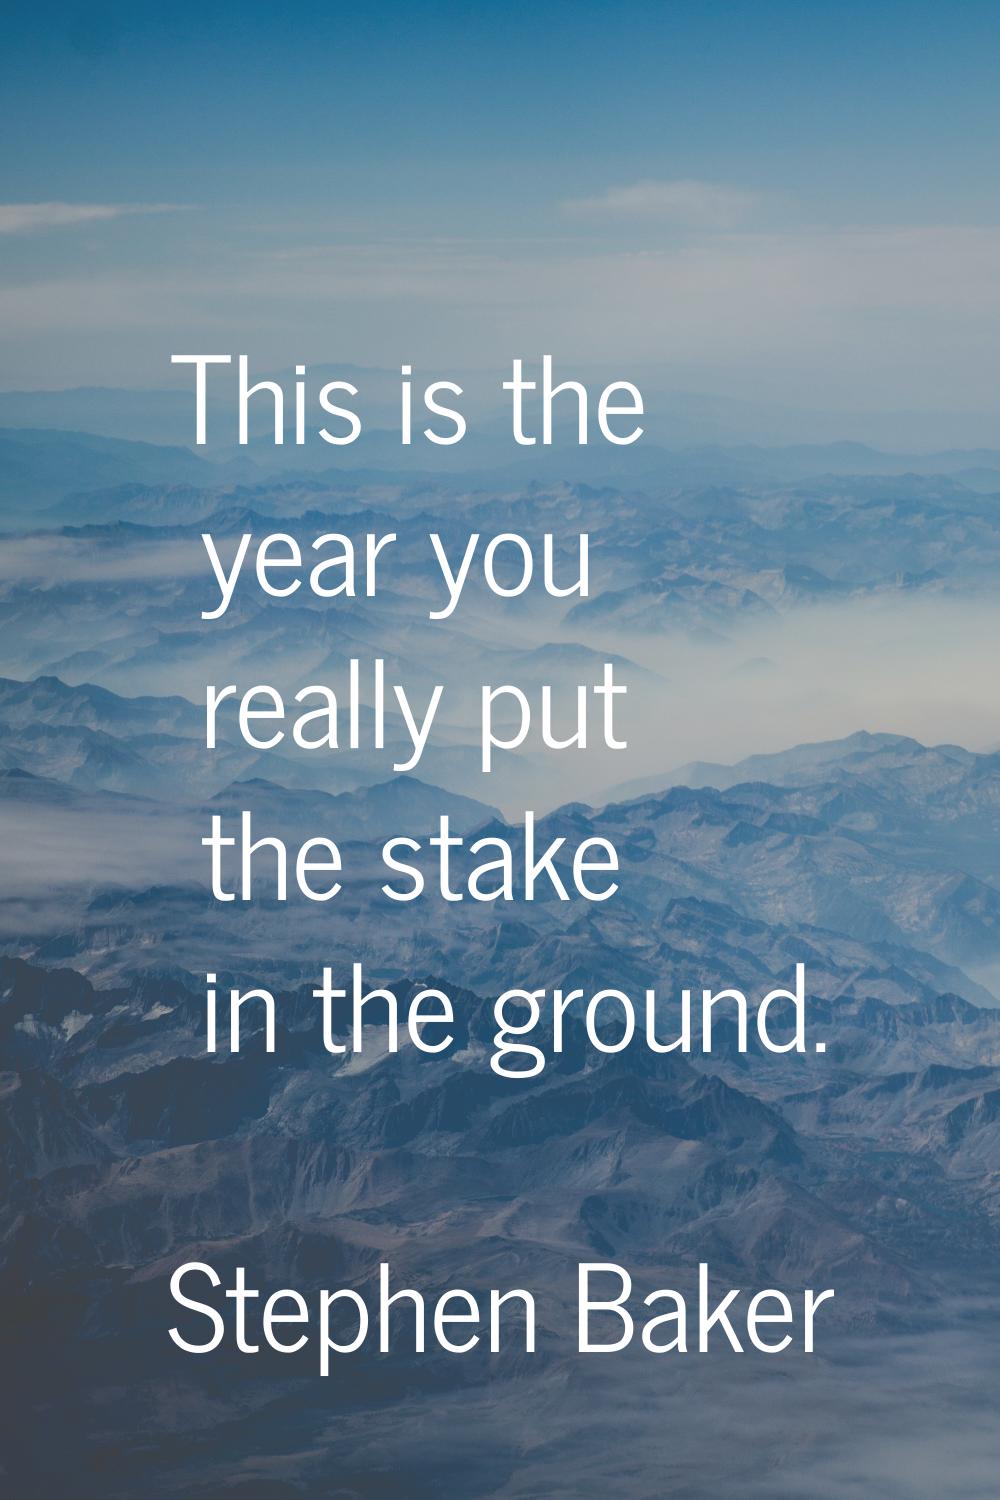 This is the year you really put the stake in the ground.